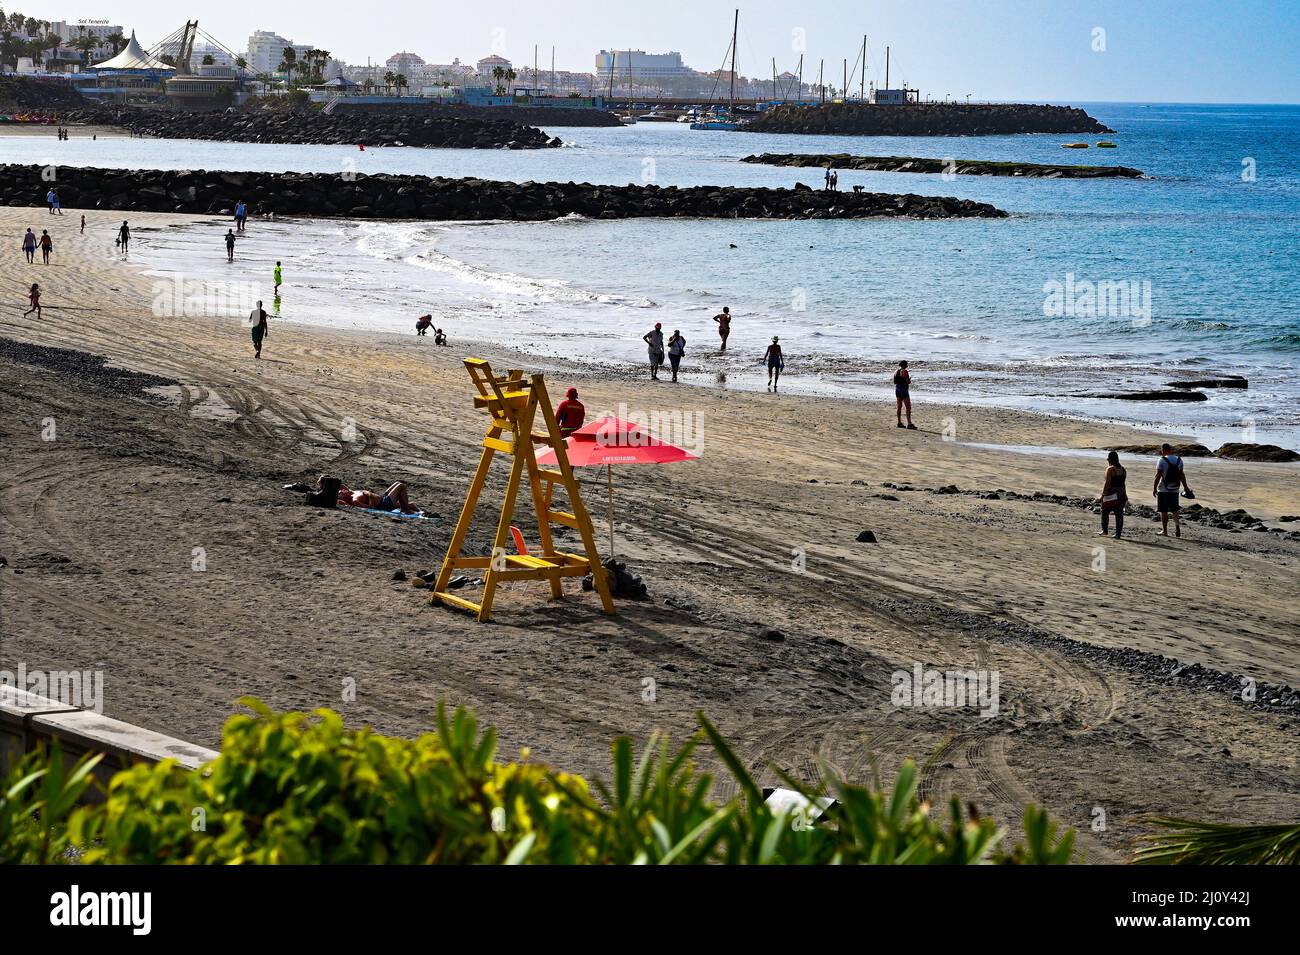 An empty yellow life savers, life guards chair on the volcanic beach with holiday makers enjoying the sunshine in Costa Adeje, Tenerife, Spain Stock Photo